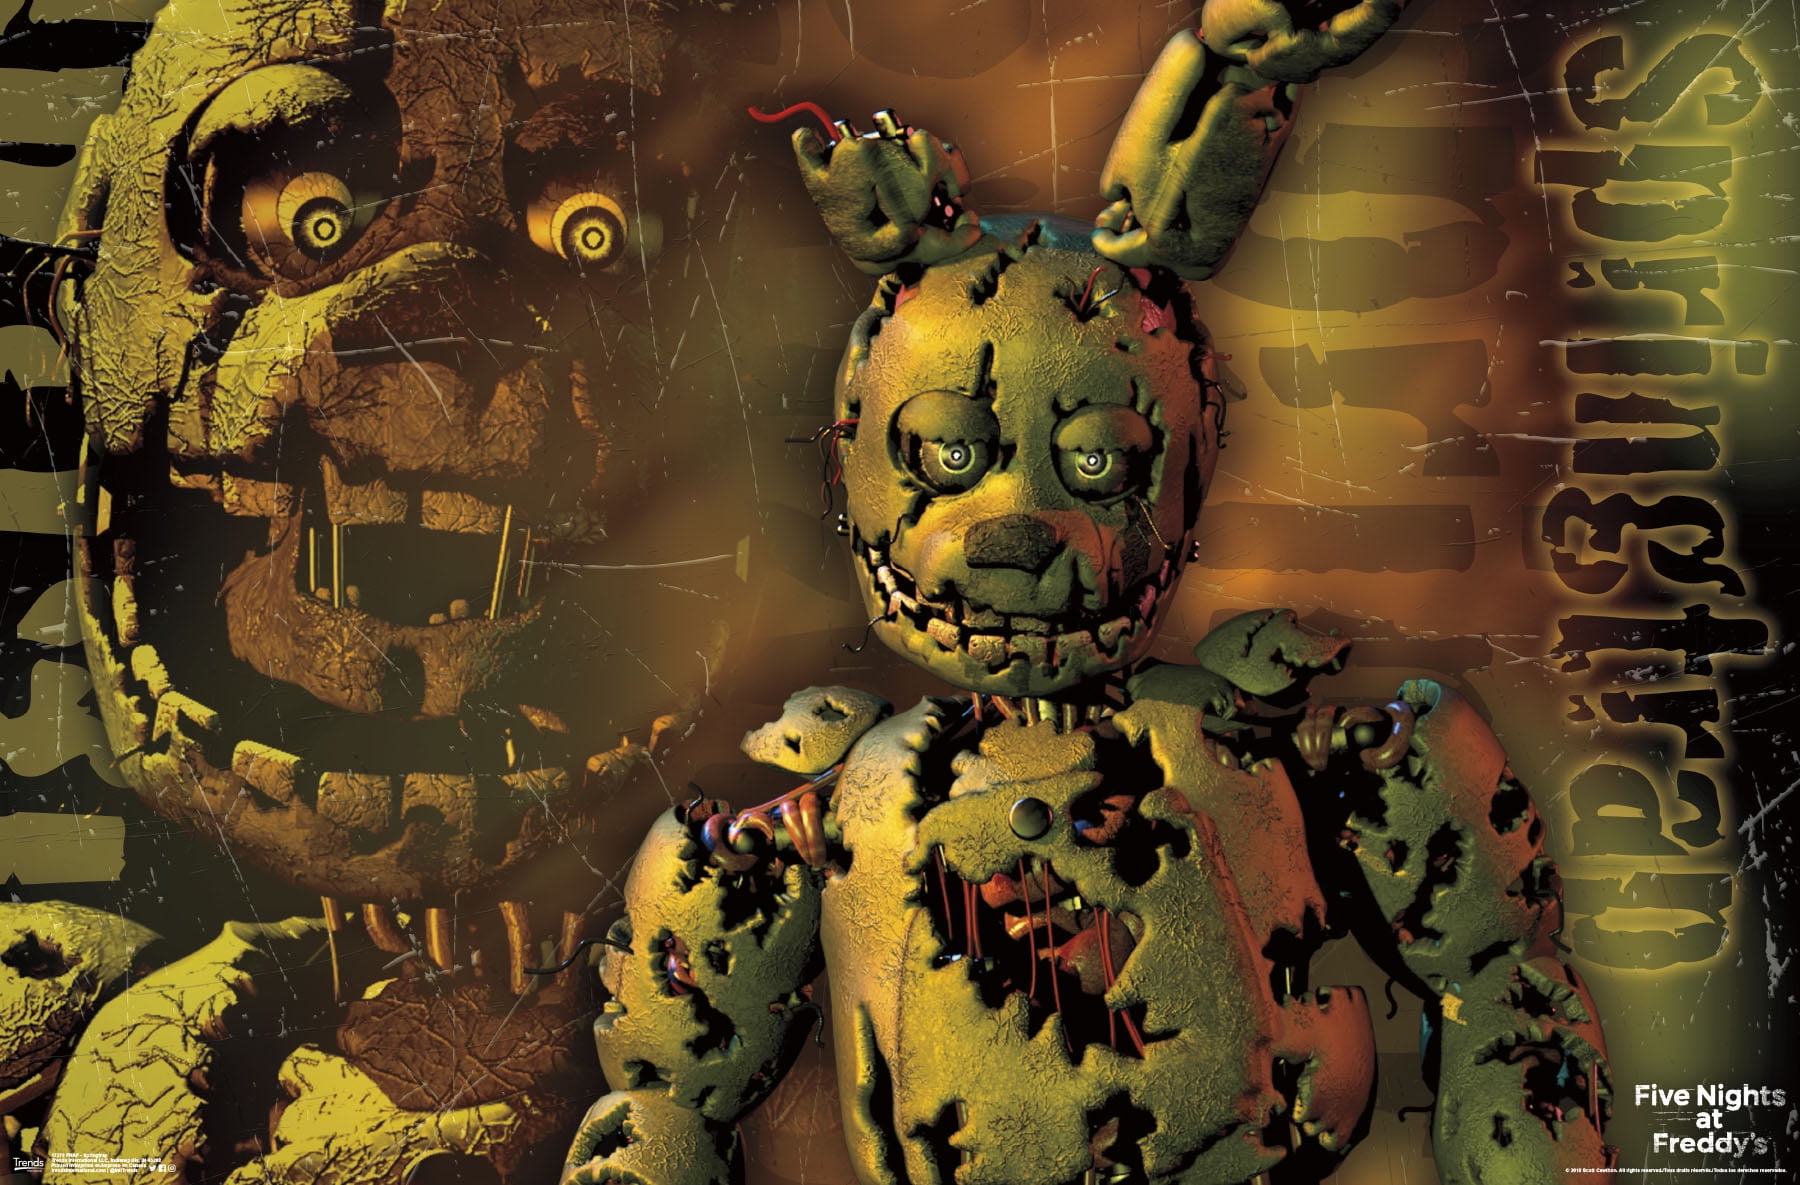 Five Nights at Freddy's - Springtrap Wall Poster, 22.375 x 34